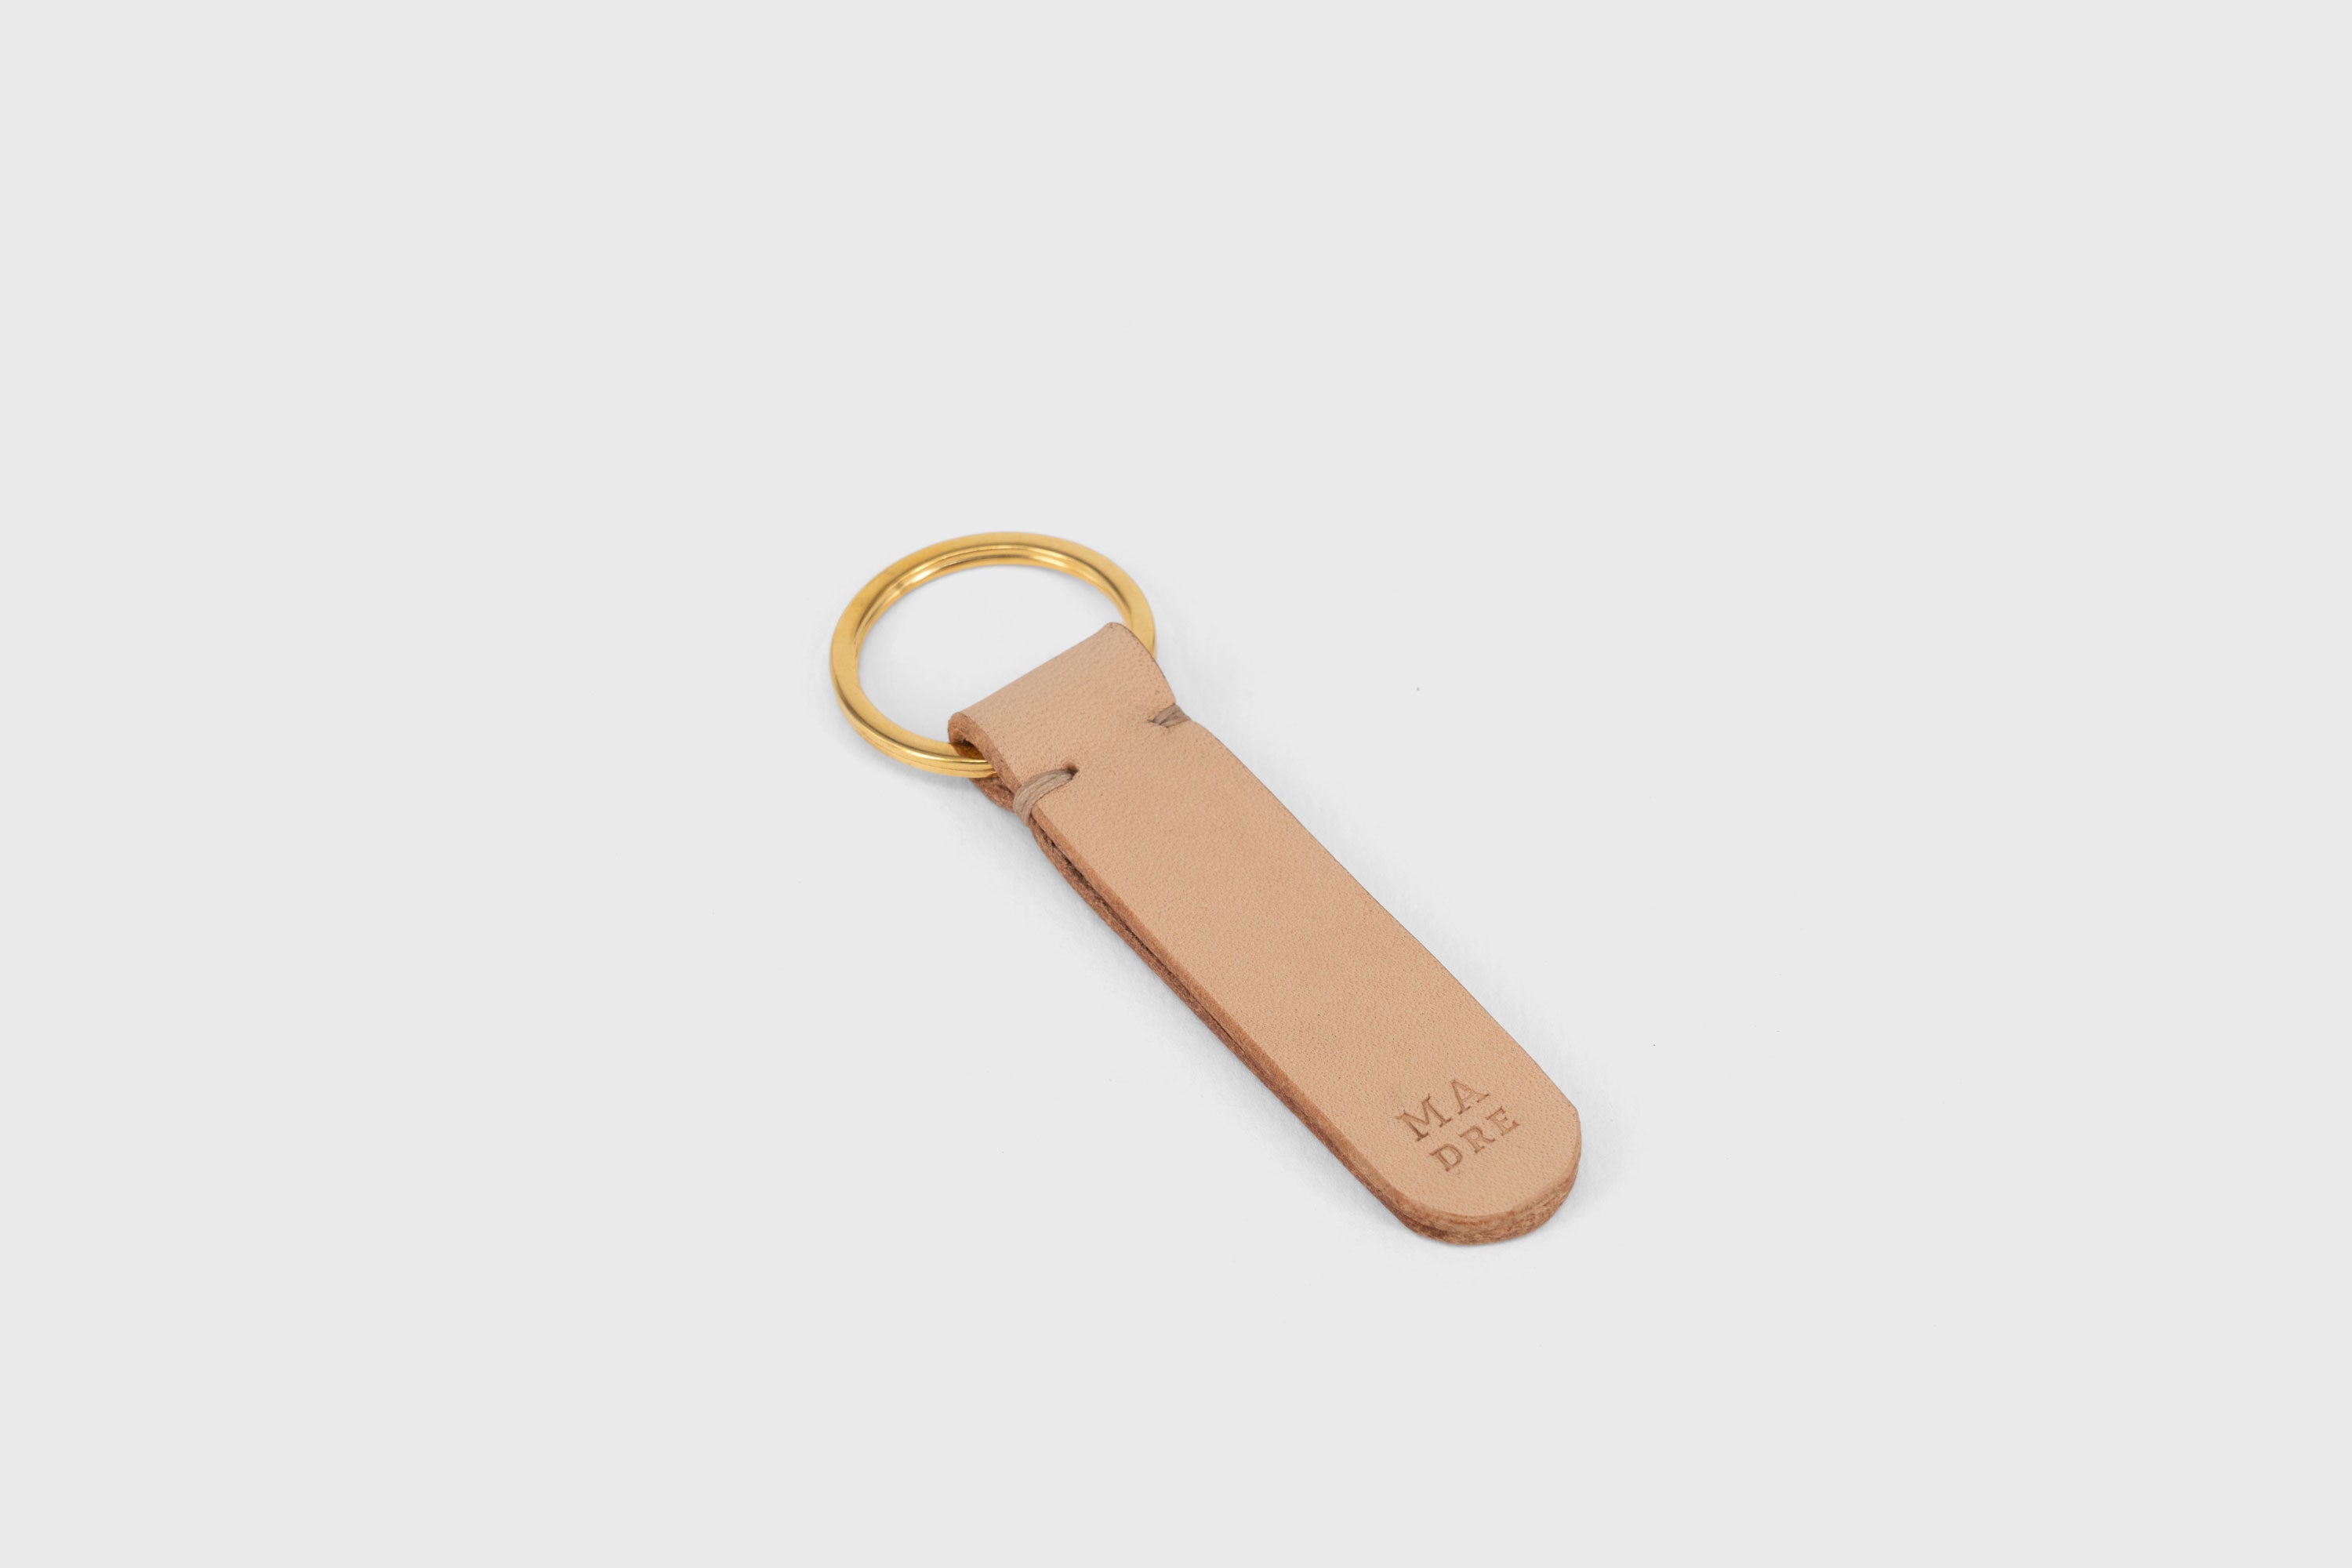 Key Ring Leather Natural Color Fob Minimalist Designer Vegetable Tanned Full Grain Handcrafted Personalised Premium Quality Gold Atelier Madre Manuel Dreesmann Barcelona Spain